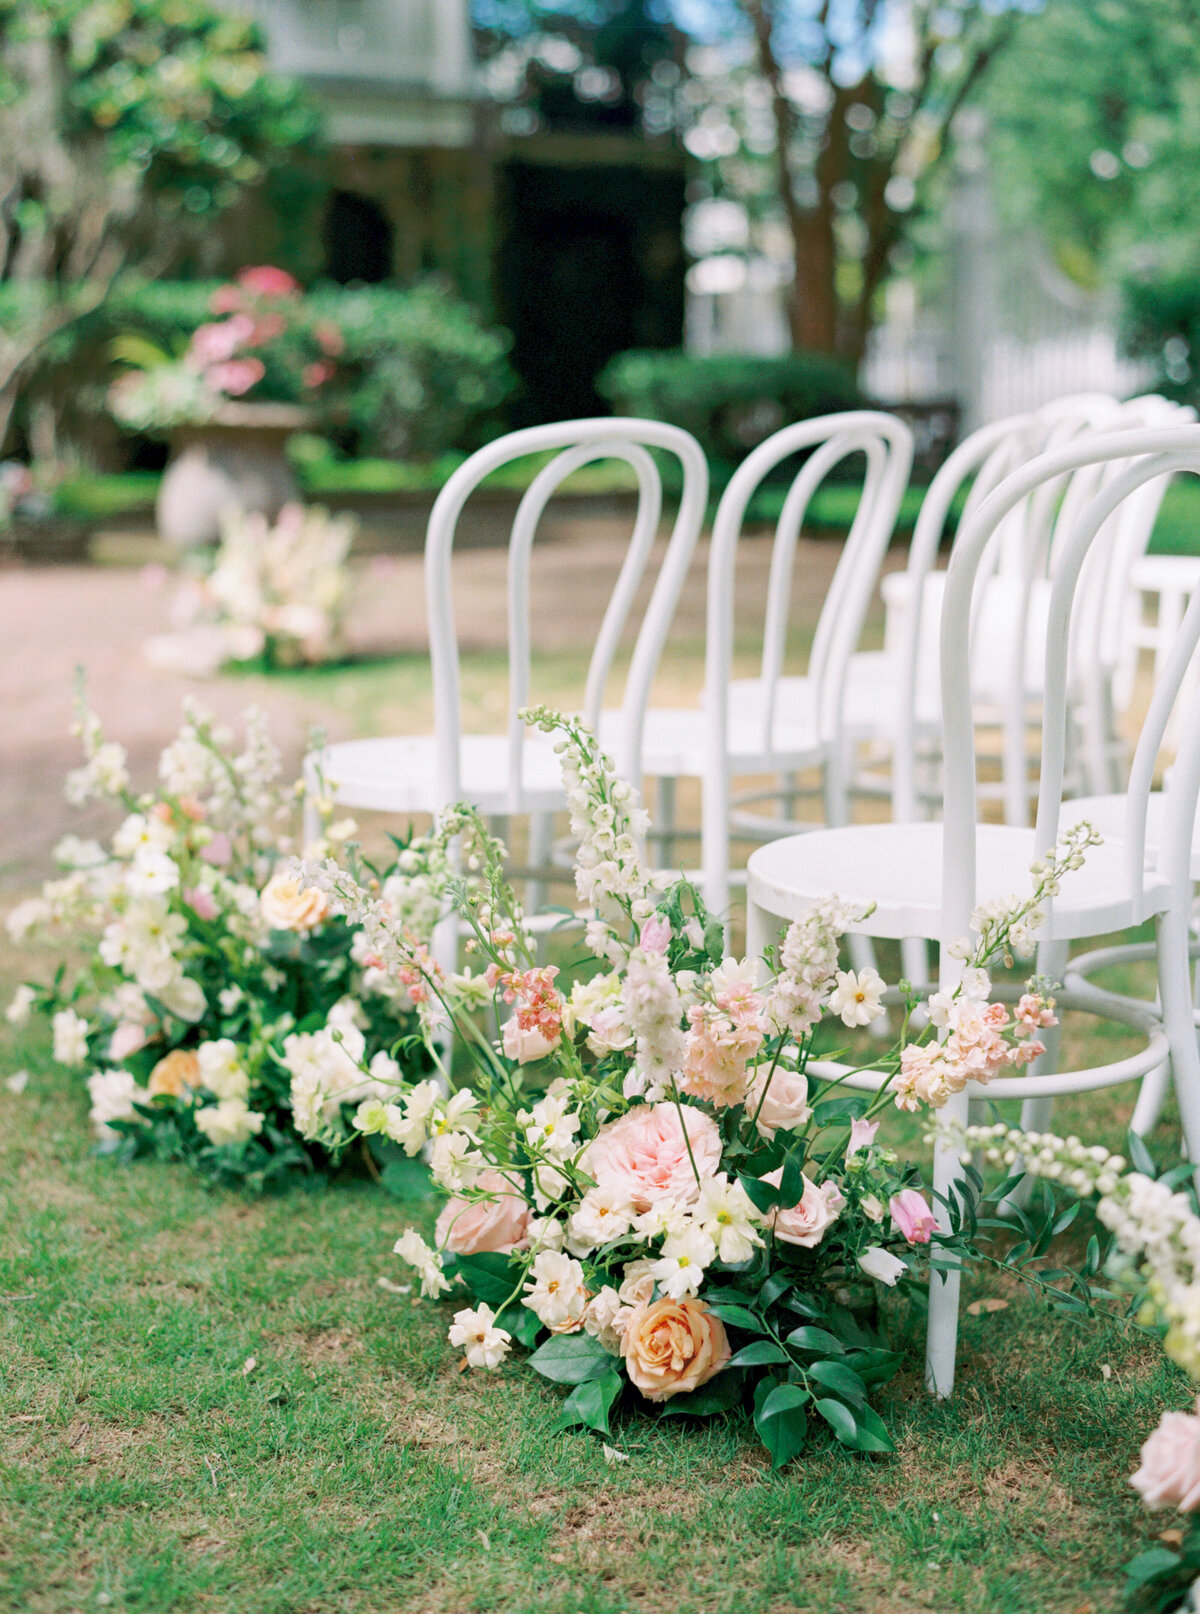 Thomas Bennett House garden wedding ceremony. White chairs and white and pink flower lined wedding aisle. Charleston spring wedding.